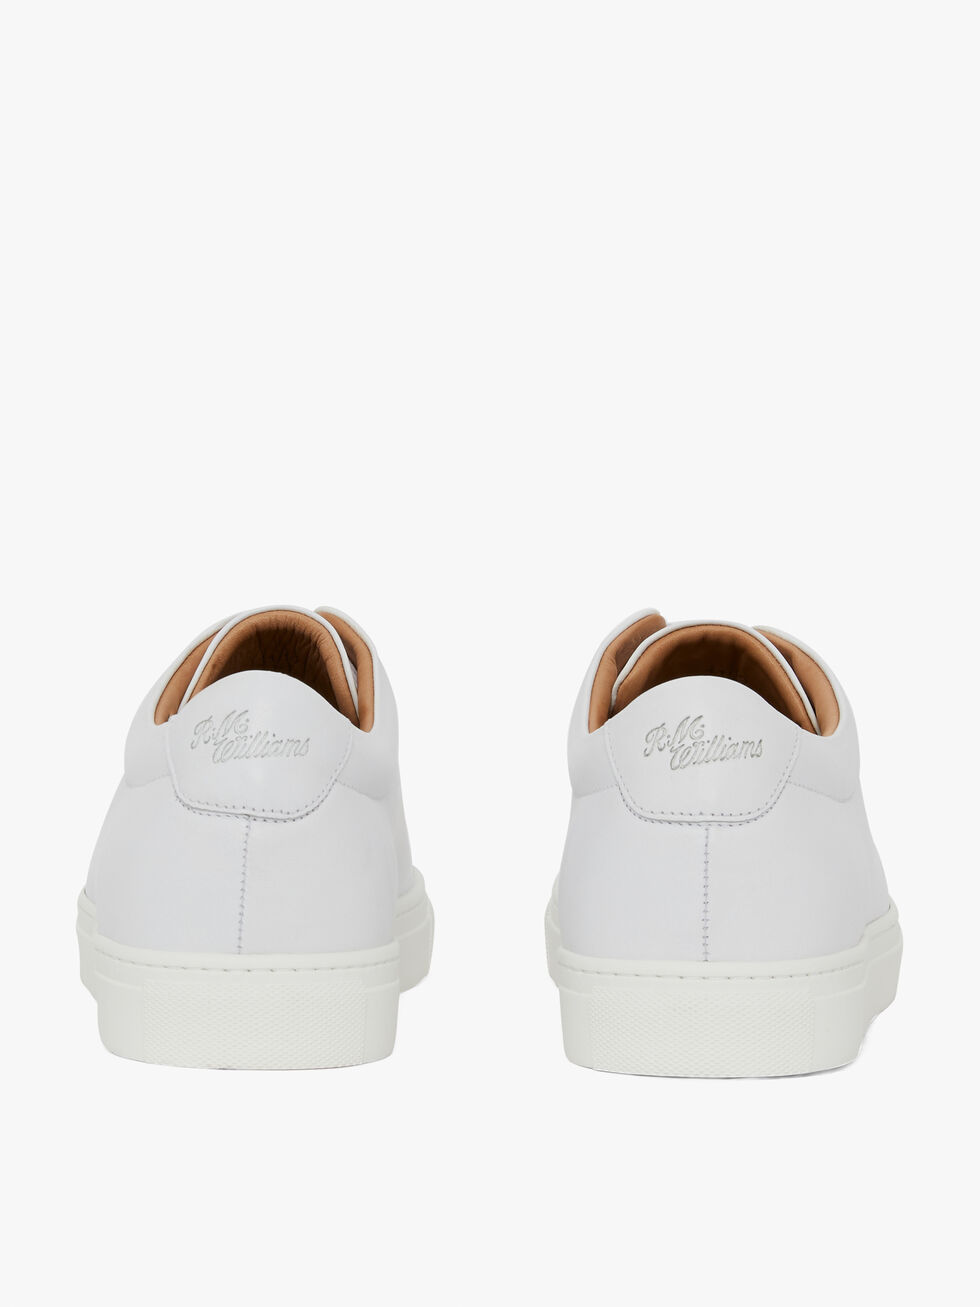 Surry Sneakers - Off White - Ruffords Country Store